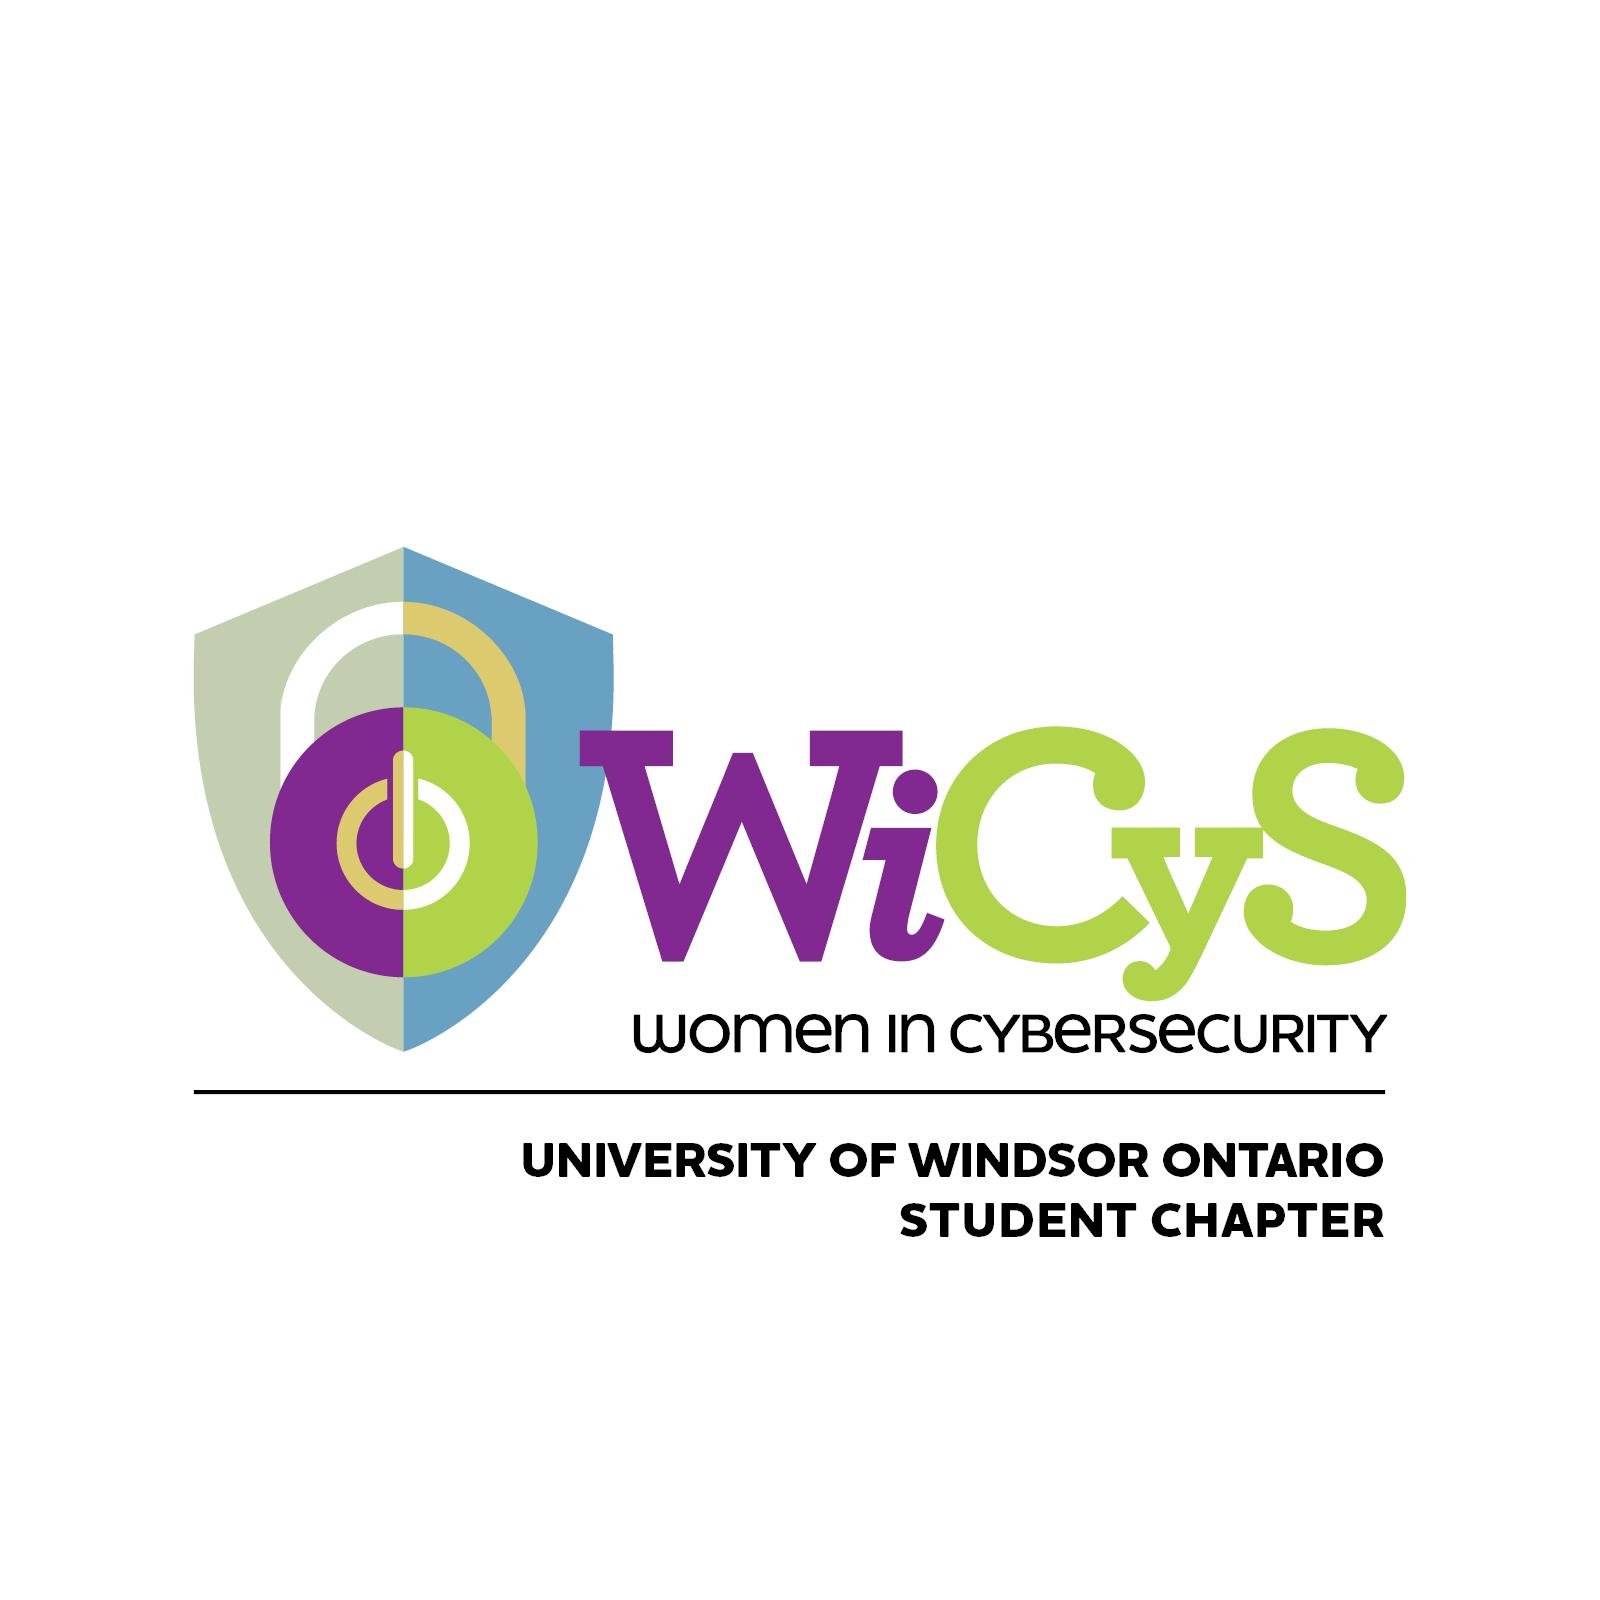 We are Canada's first Women in Cybersecurity(WiCyS) student chapter located in University of Windsor, Windsor, Ontario.